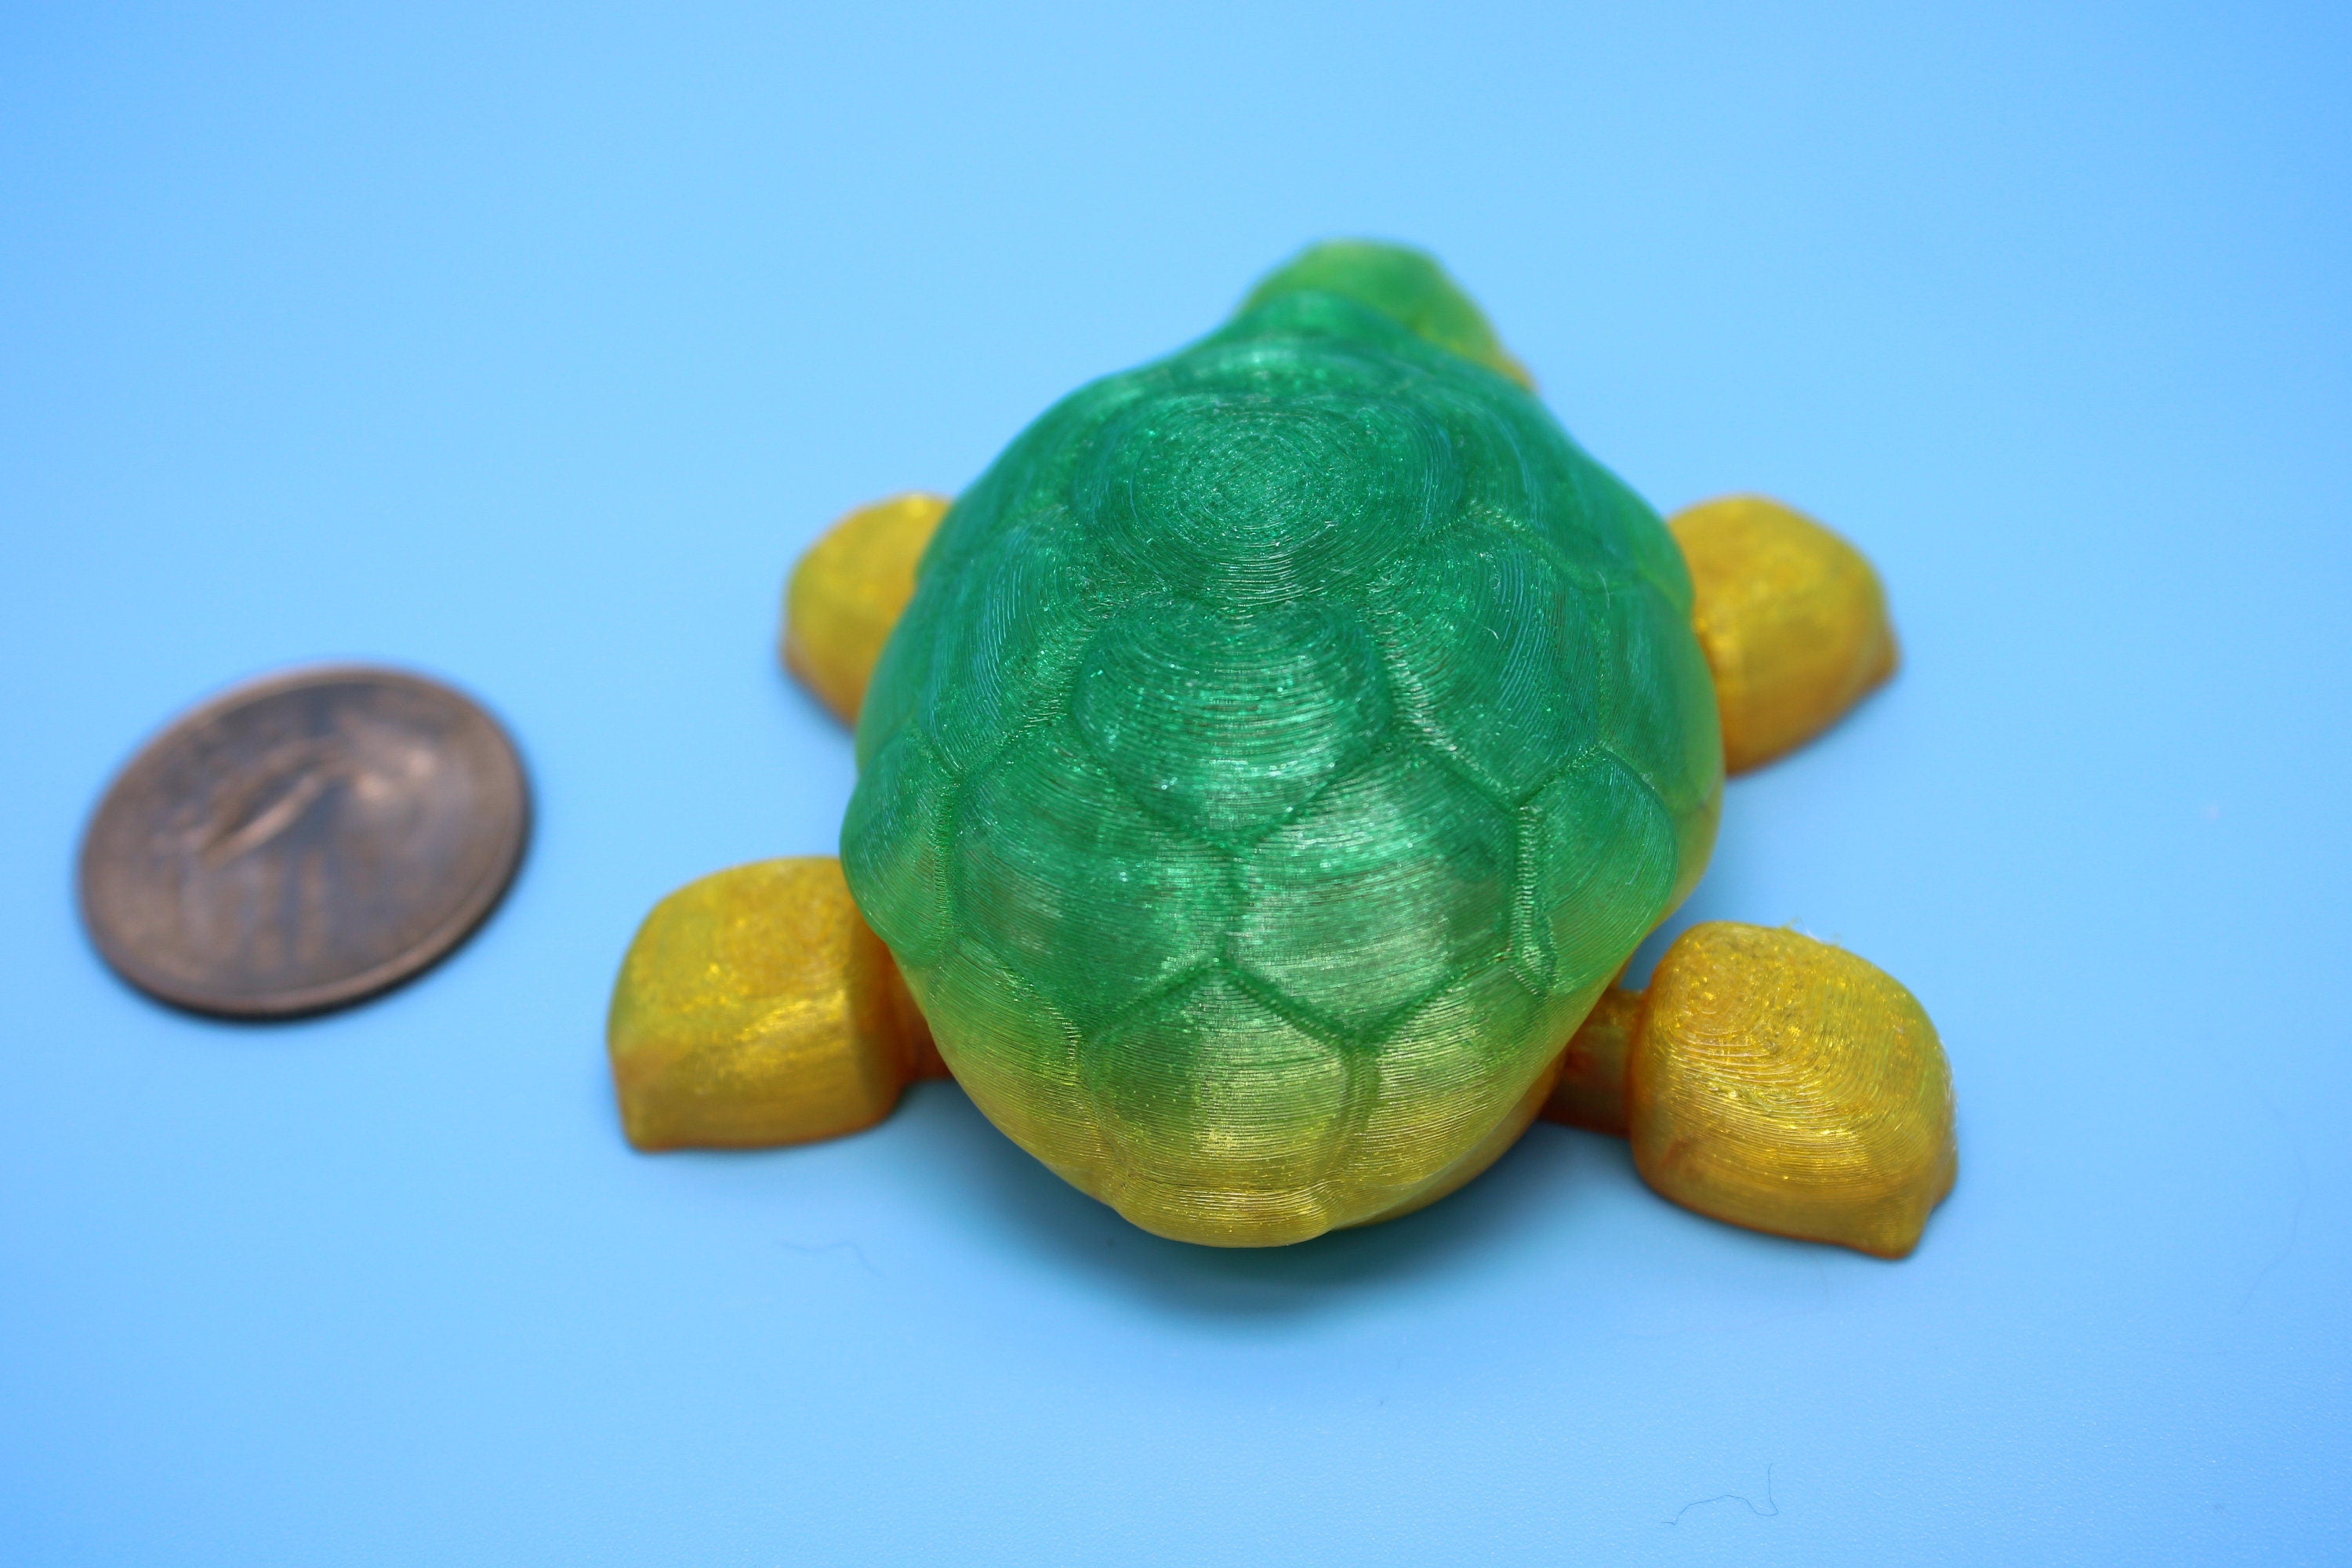 Miniature Flexible Articulating Turtle | 3D Printed Cute Turtle with heart on shell | Friendly Reptile | Sensory Toy | Fidget Toy. (TPU)